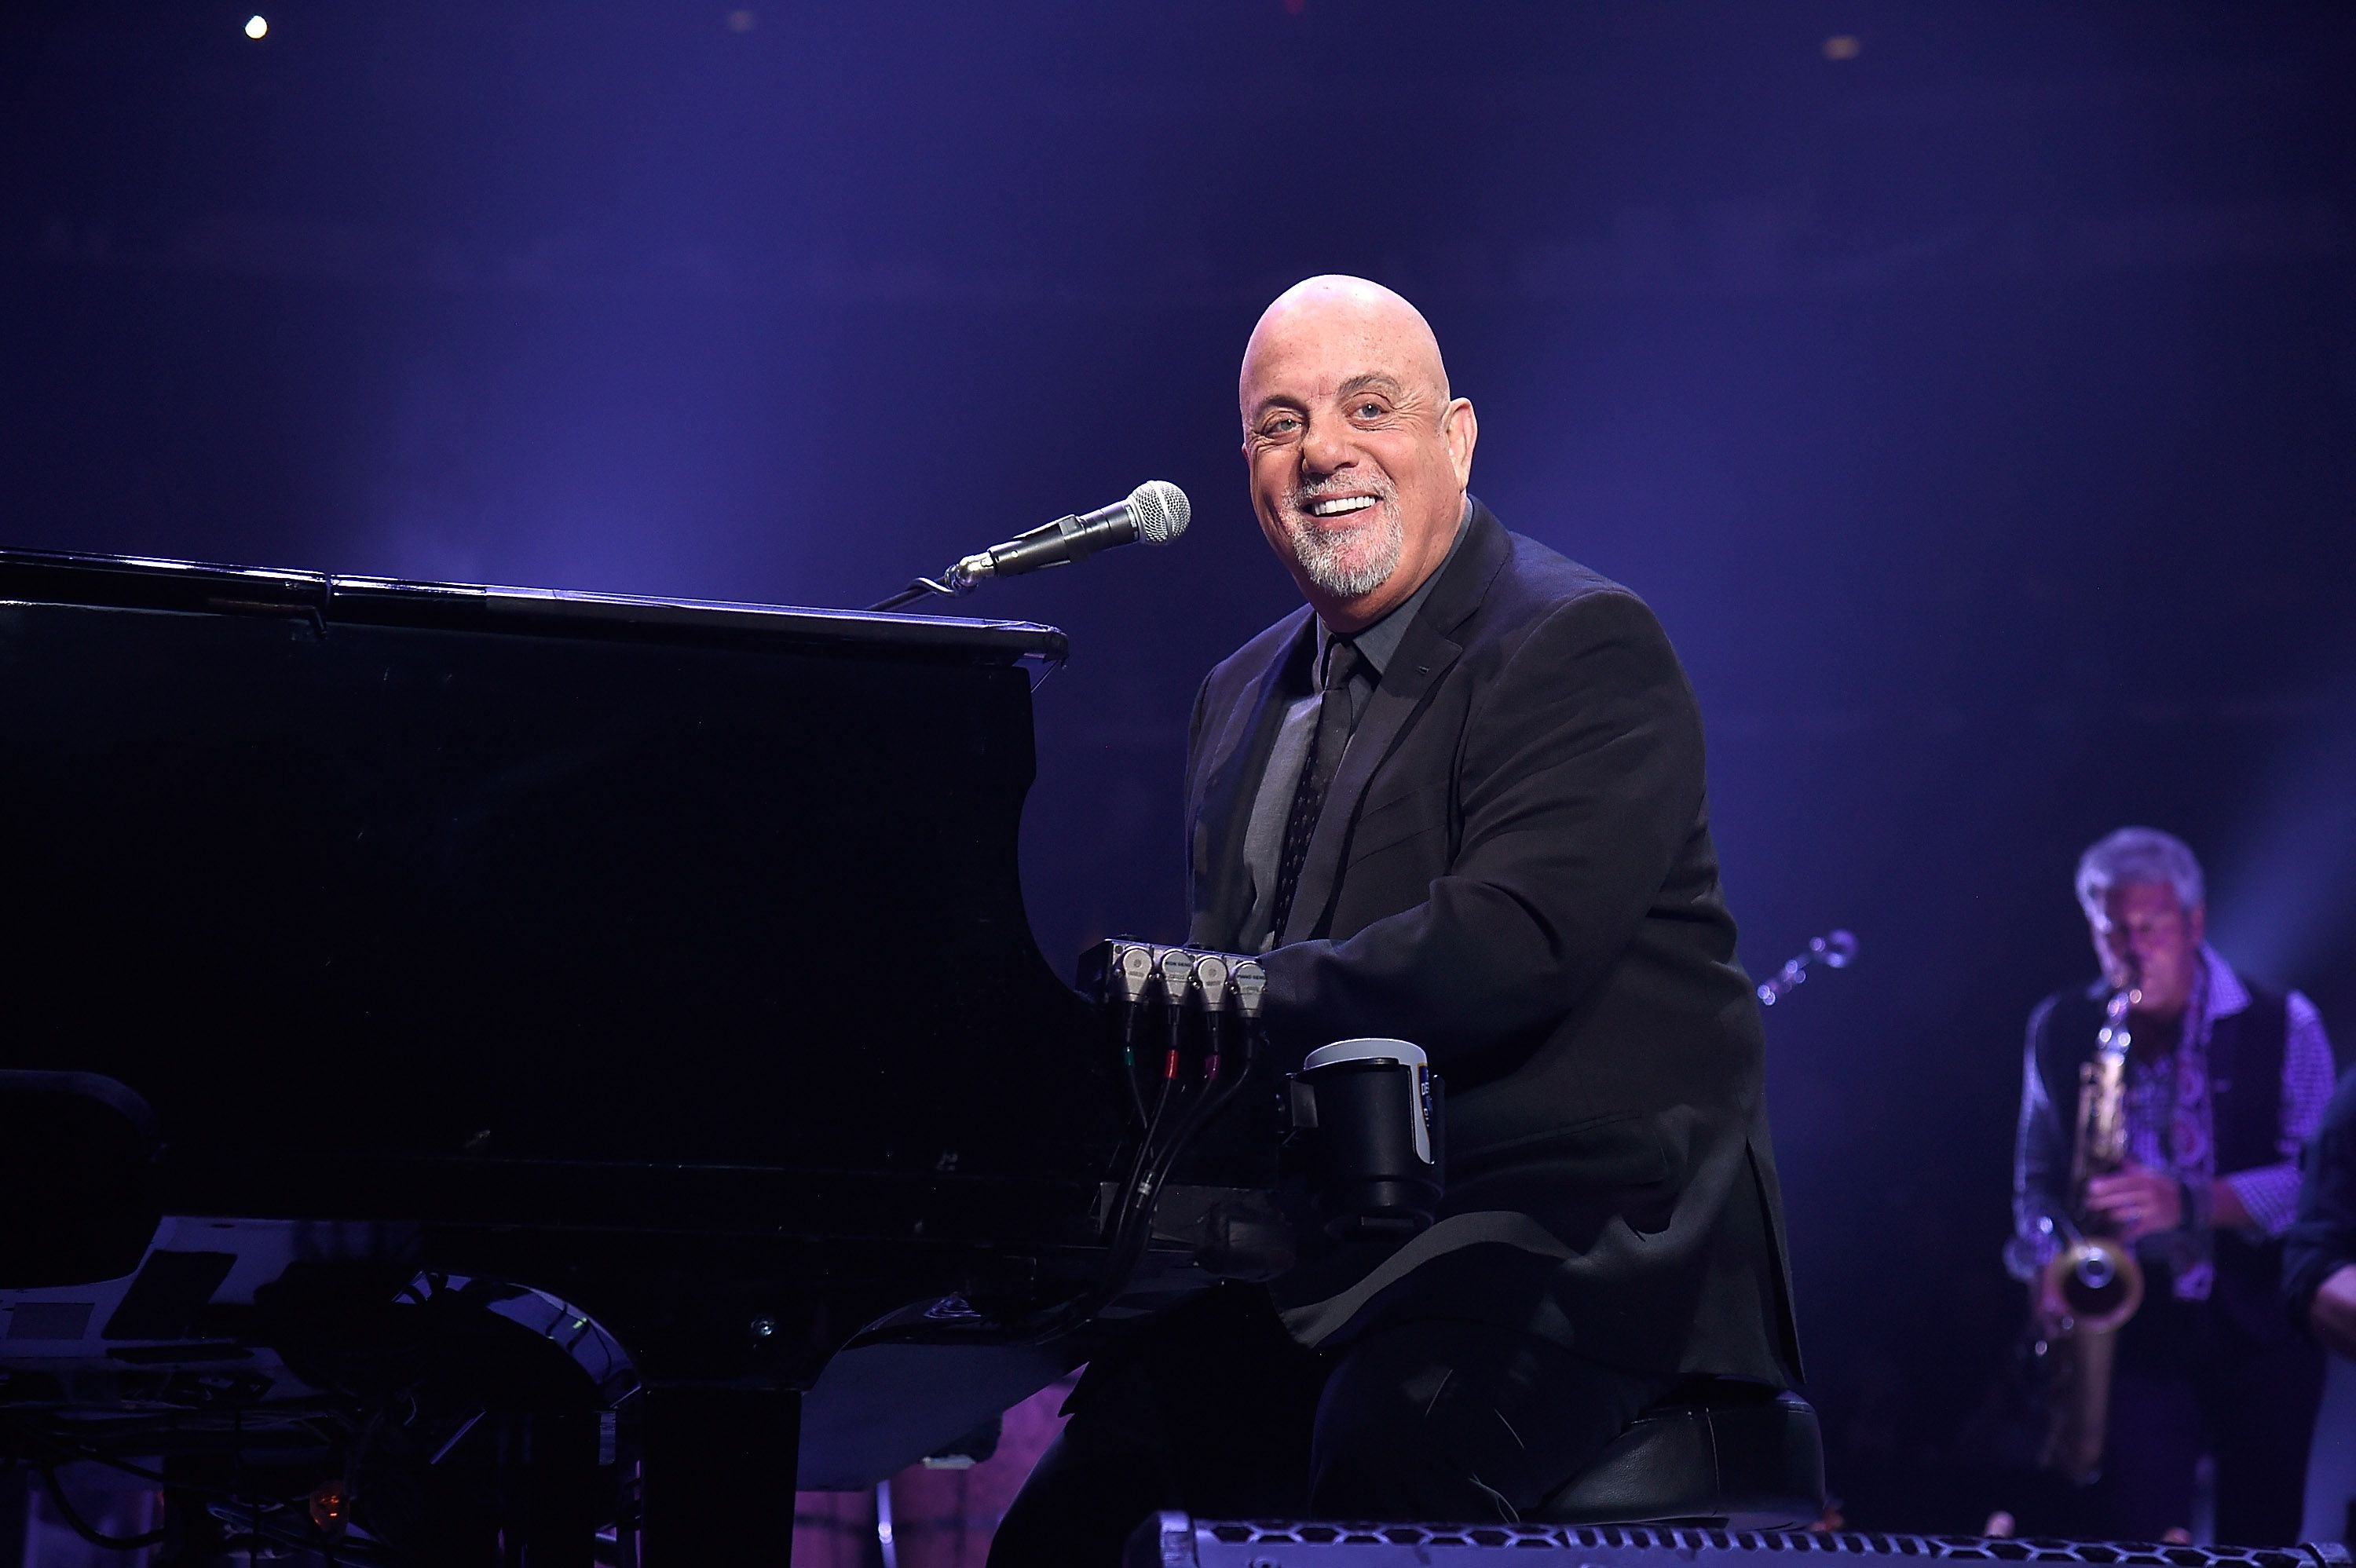 Billy Joel at Madison Square Garden on September 30, 2017 | Photo: Getty Images